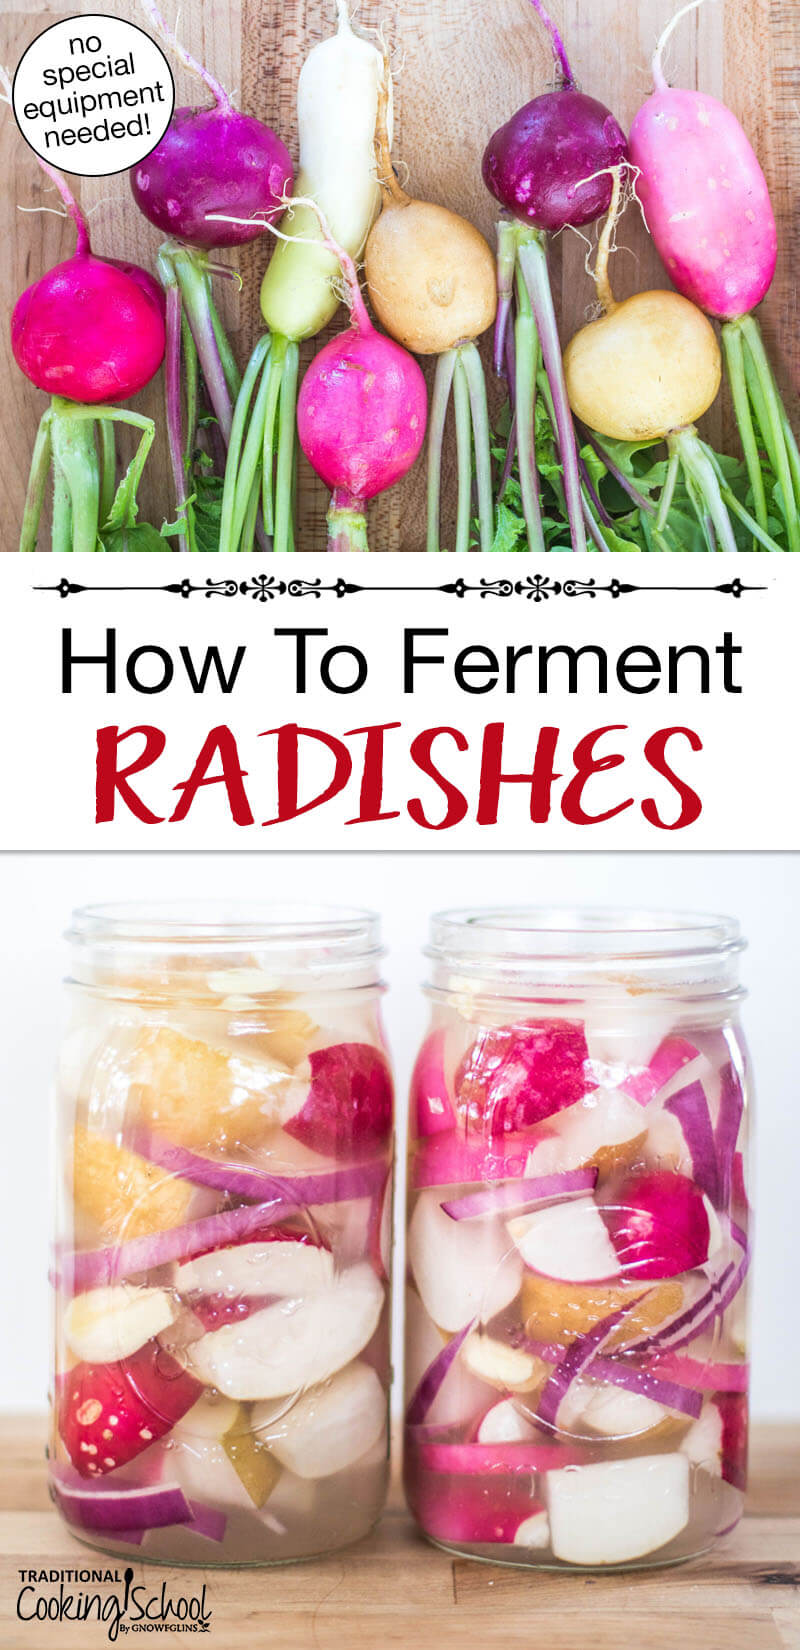 Photo collage of radishes freshly picked from the garden and radish chunks in quart-sized glass jars ready to be pickled. Text overlay says: "How To Ferment Radishes (no special equipment needed!)"